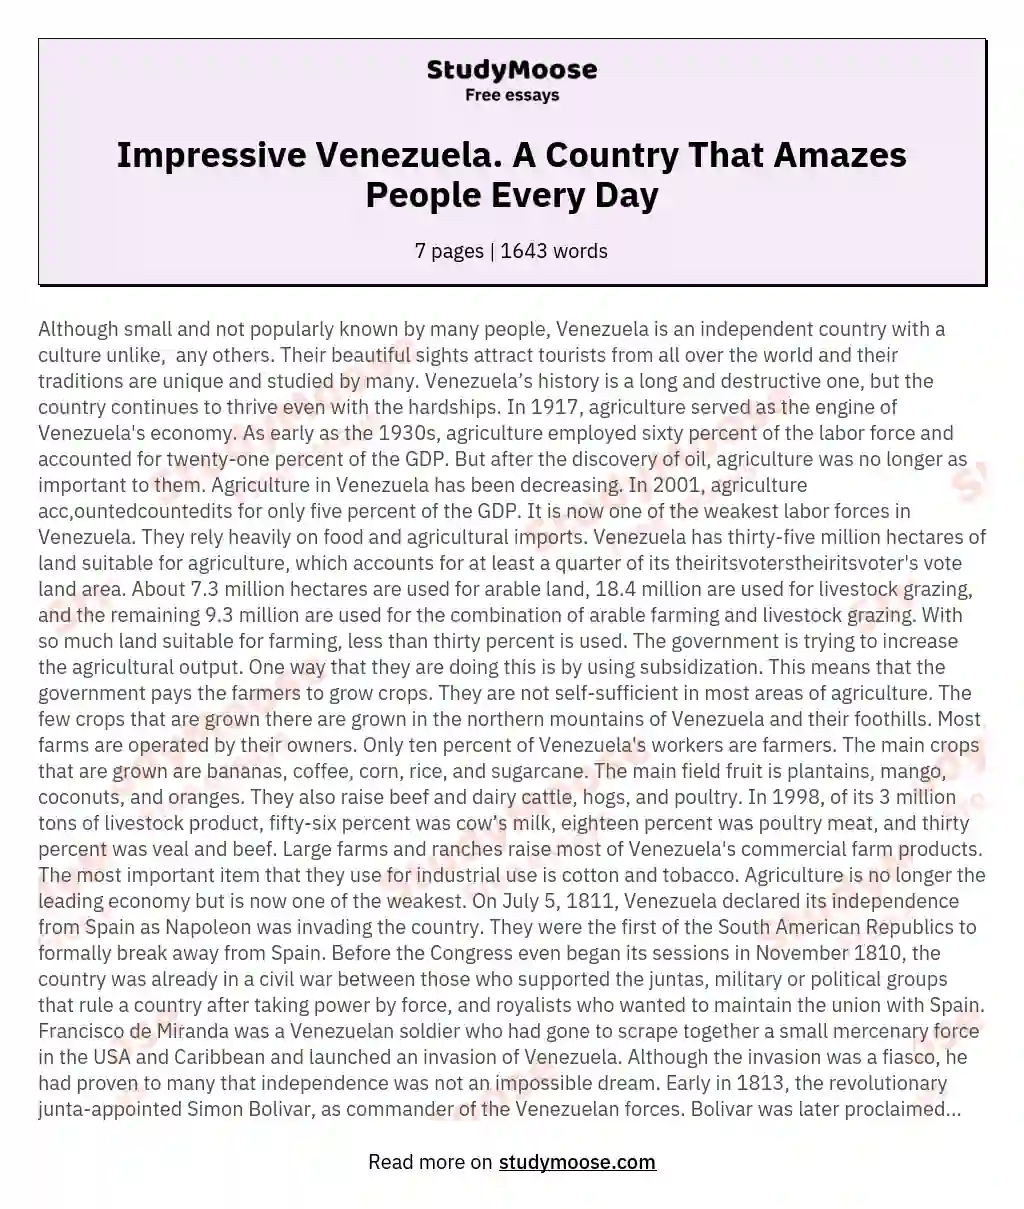 Impressive Venezuela. A Country That Amazes People Every Day essay